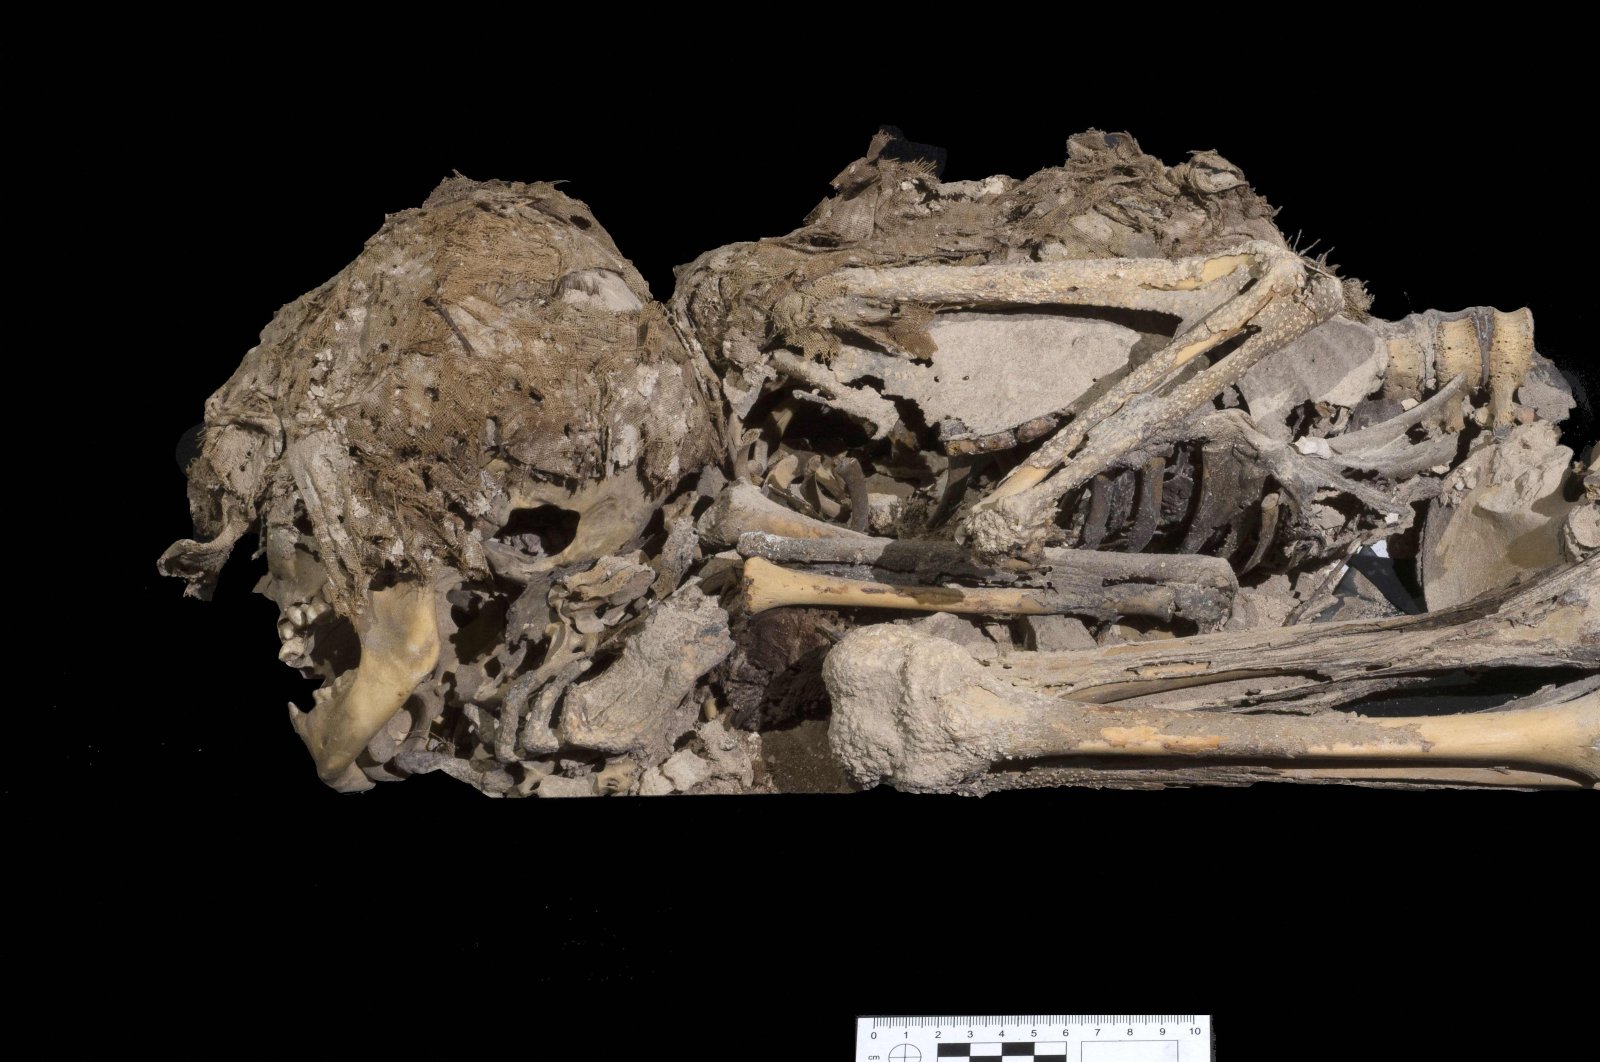 A handout picture provided by the Israeli Antiquities Authority on March 16, 2021, shows a picture taken on Nov. 21, 2019, of a 6,000-year-old mummified skeleton of a child excavated from a cave in the Judean Desert. (AFP Photo / Israel Antiquities Authority)